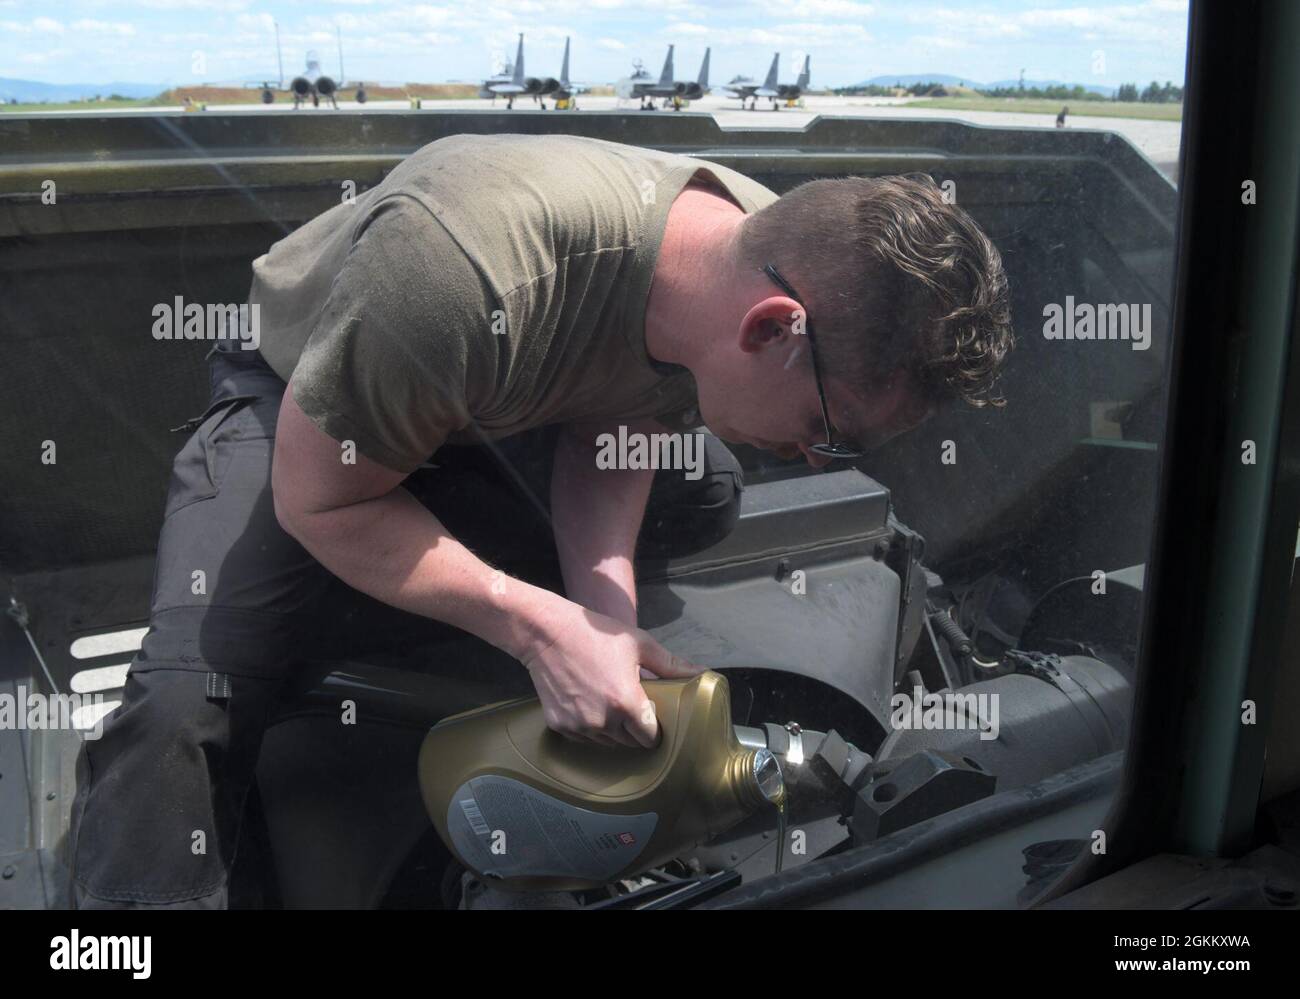 U.S. Air Force Staff Sgt. Kevin Grimm, 48th Logistics Readiness Squadron vehicle maintenance craftsman, tops off the oil on a refueling truck during exercise Astral Knight 21 at Larissa Air Base, Greece, May 20, 2021. During Astral Knight 21, the Liberty Wing sharpened its ability to deploy capable, credible forces to operate from strategic locations, which is enabled by strong regional partnerships critical for a rapid united response to adversaries around the world. Stock Photo